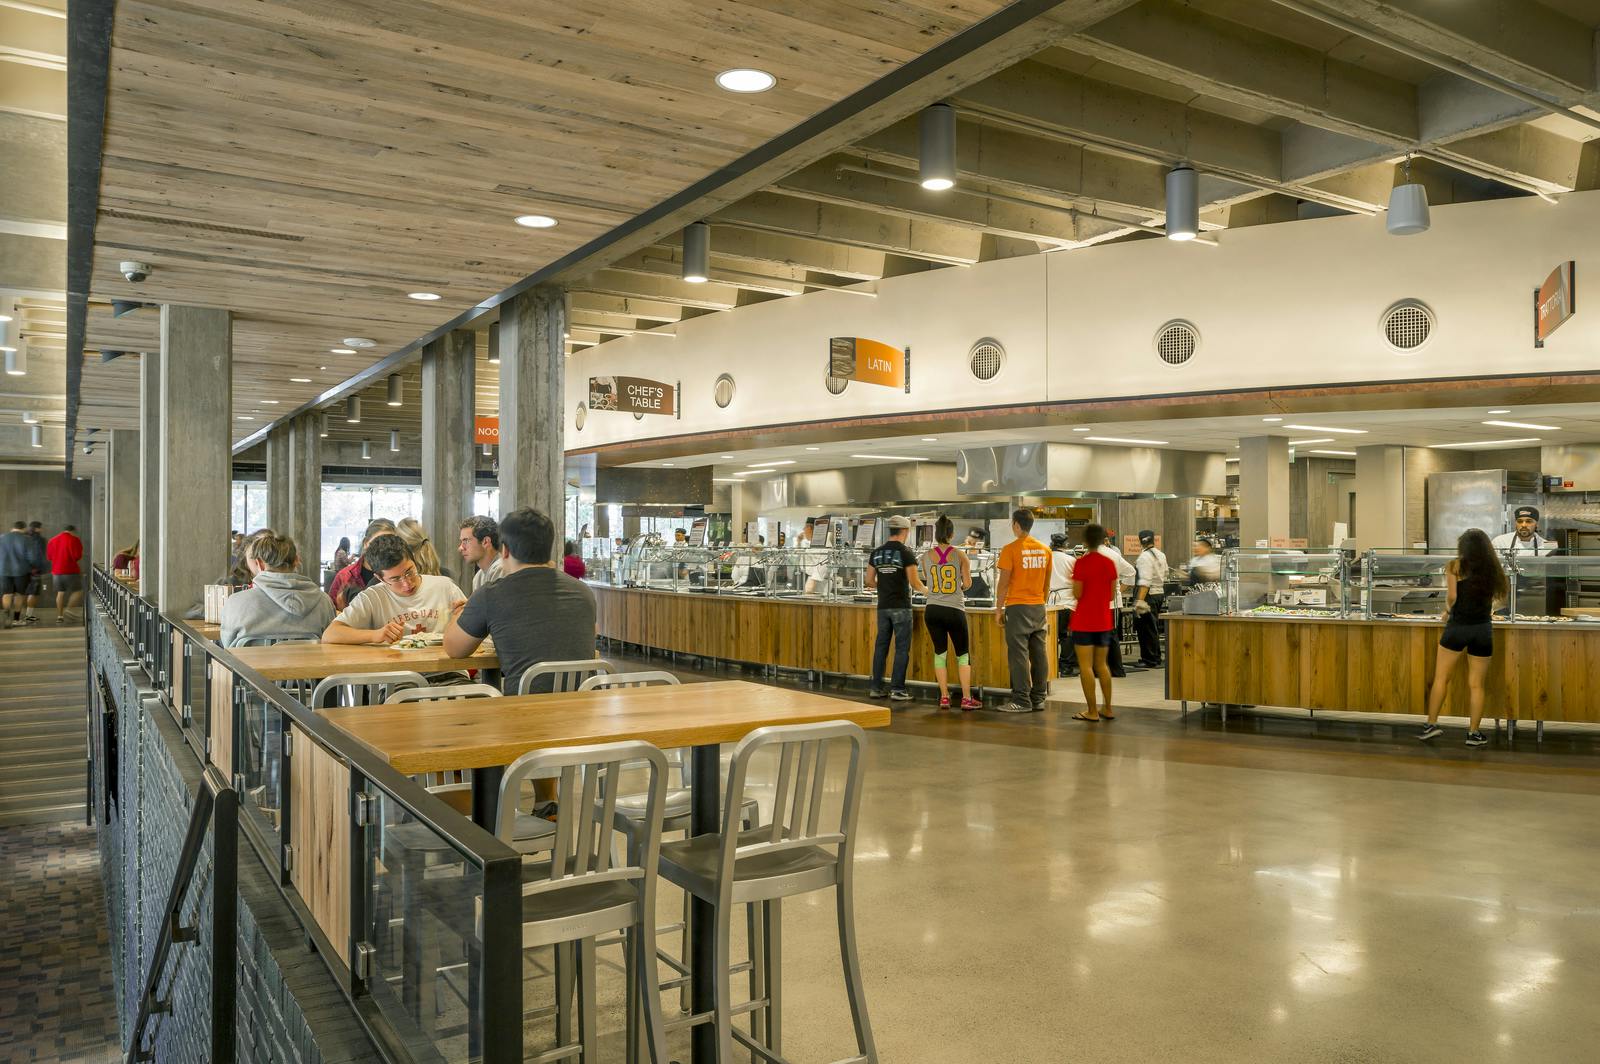 Hampshire Dining Commons at UMass Amherst